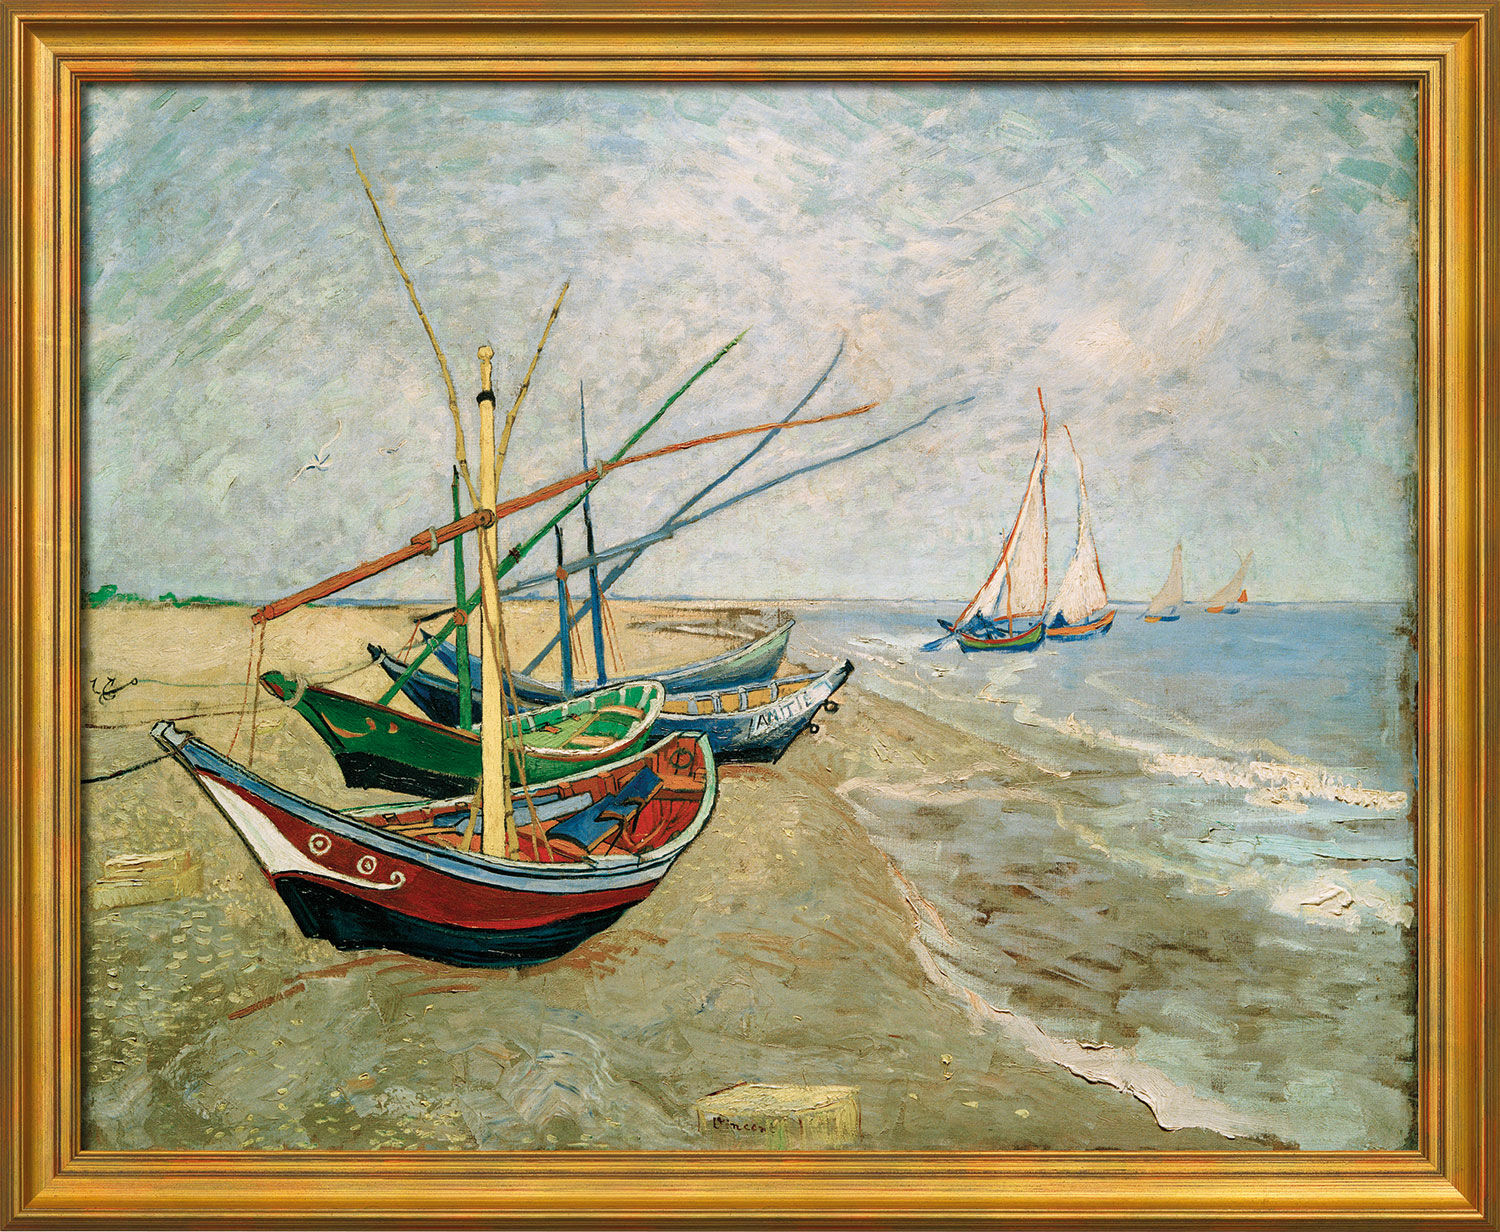 Picture "Fishing Boats on the Beach at Les Saintes-Maries-de-la-Mer" (1888), framed by Vincent van Gogh